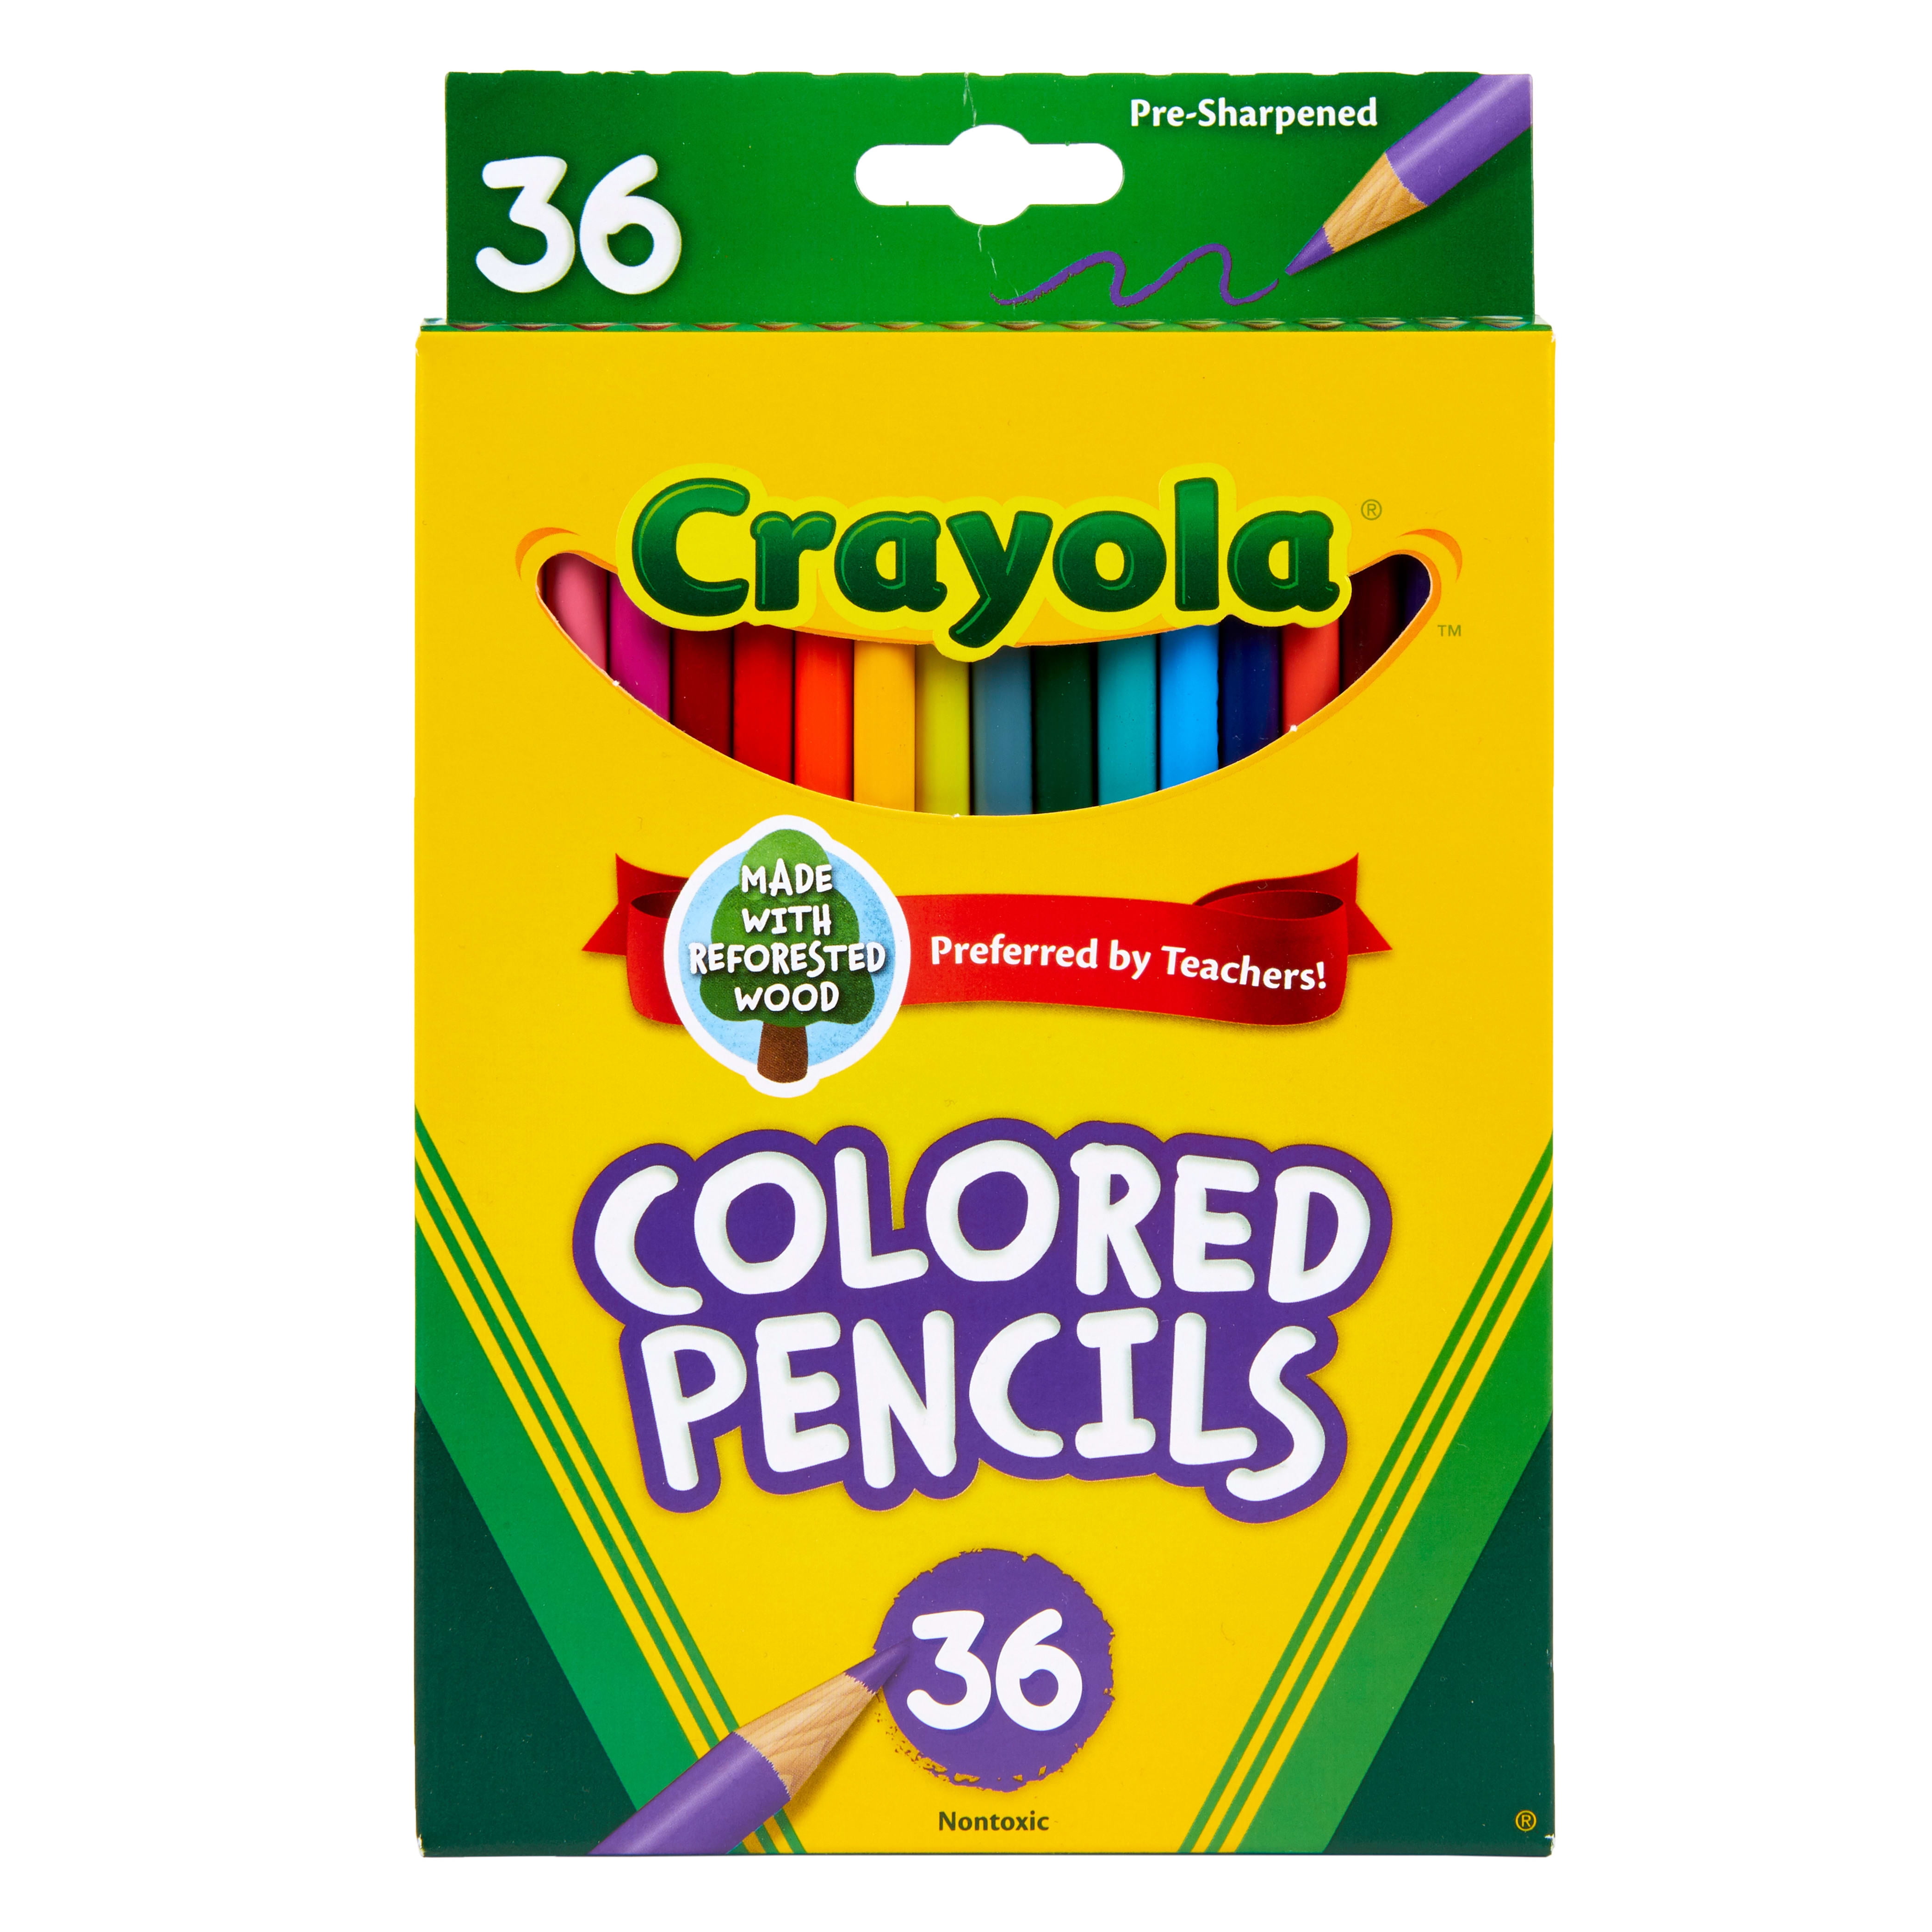 The Mega Deals Crayola Colored Pencils with Sketch Book. Premium 36 Colored Pencils for Adult Coloring with Sketchbook, Drawing Pad. Artist Color